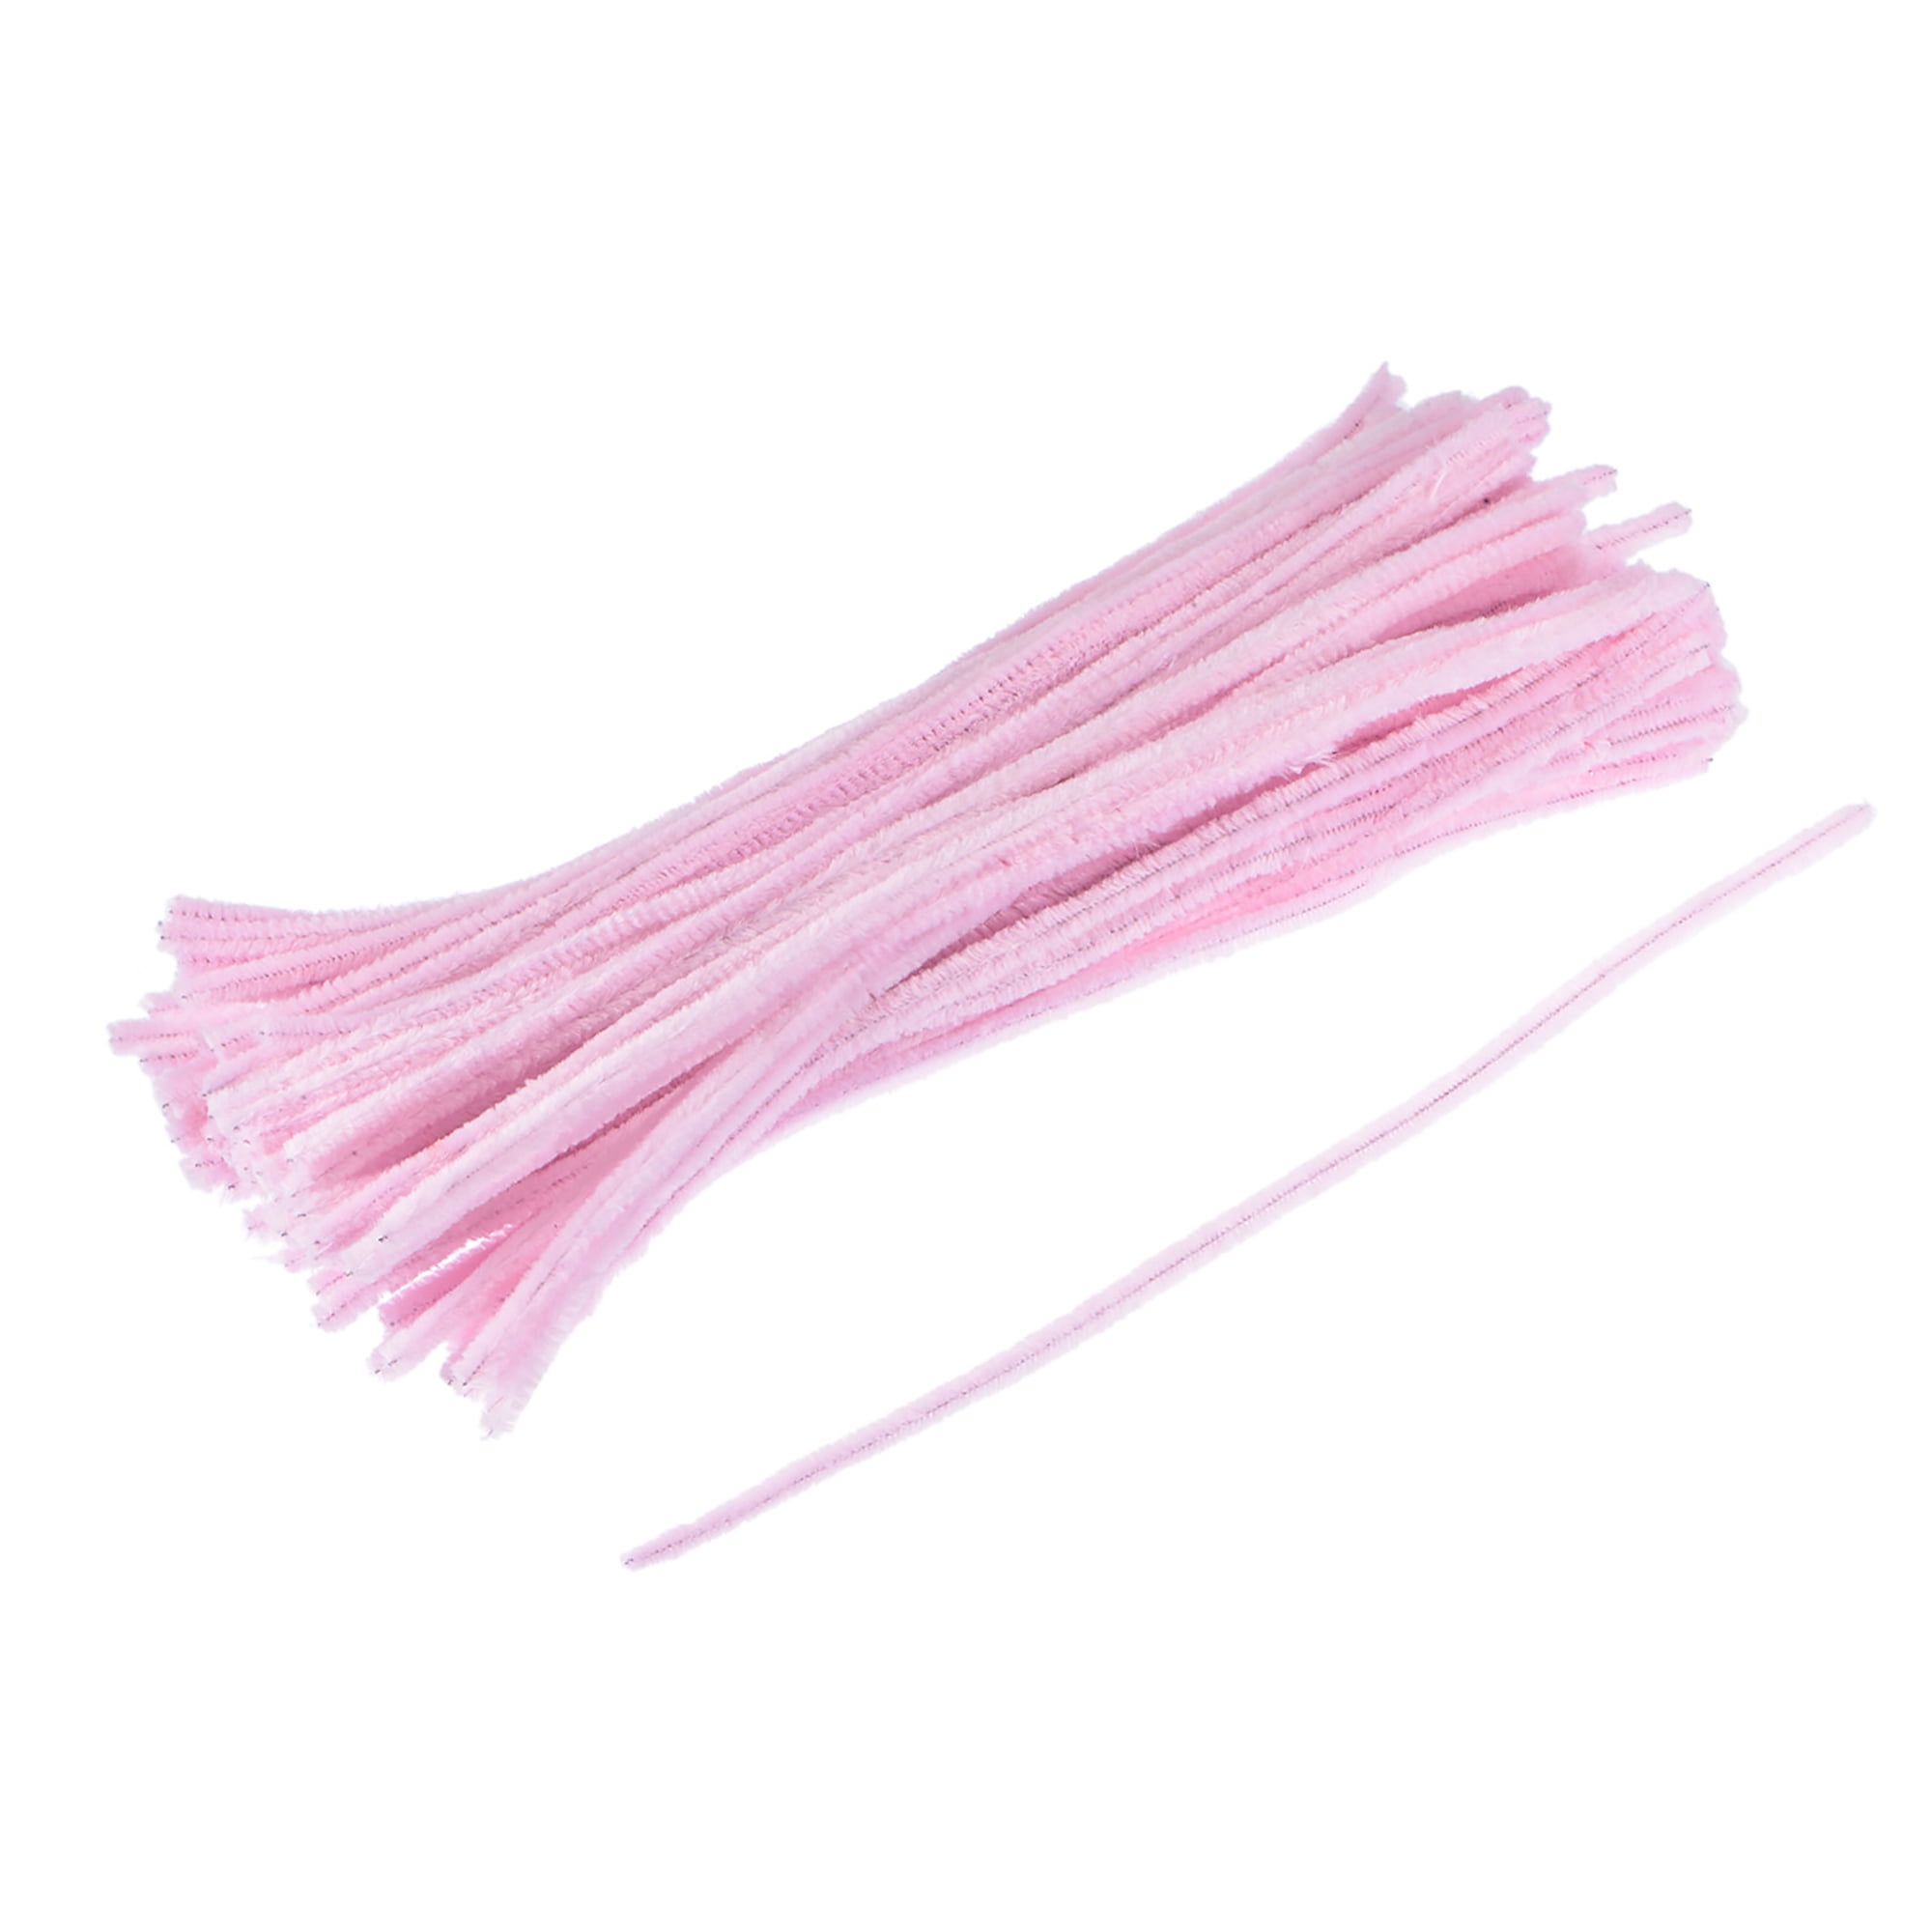 F.e.s.s Extra Absorbent Pipe Cleaners 12 inches (Soft)